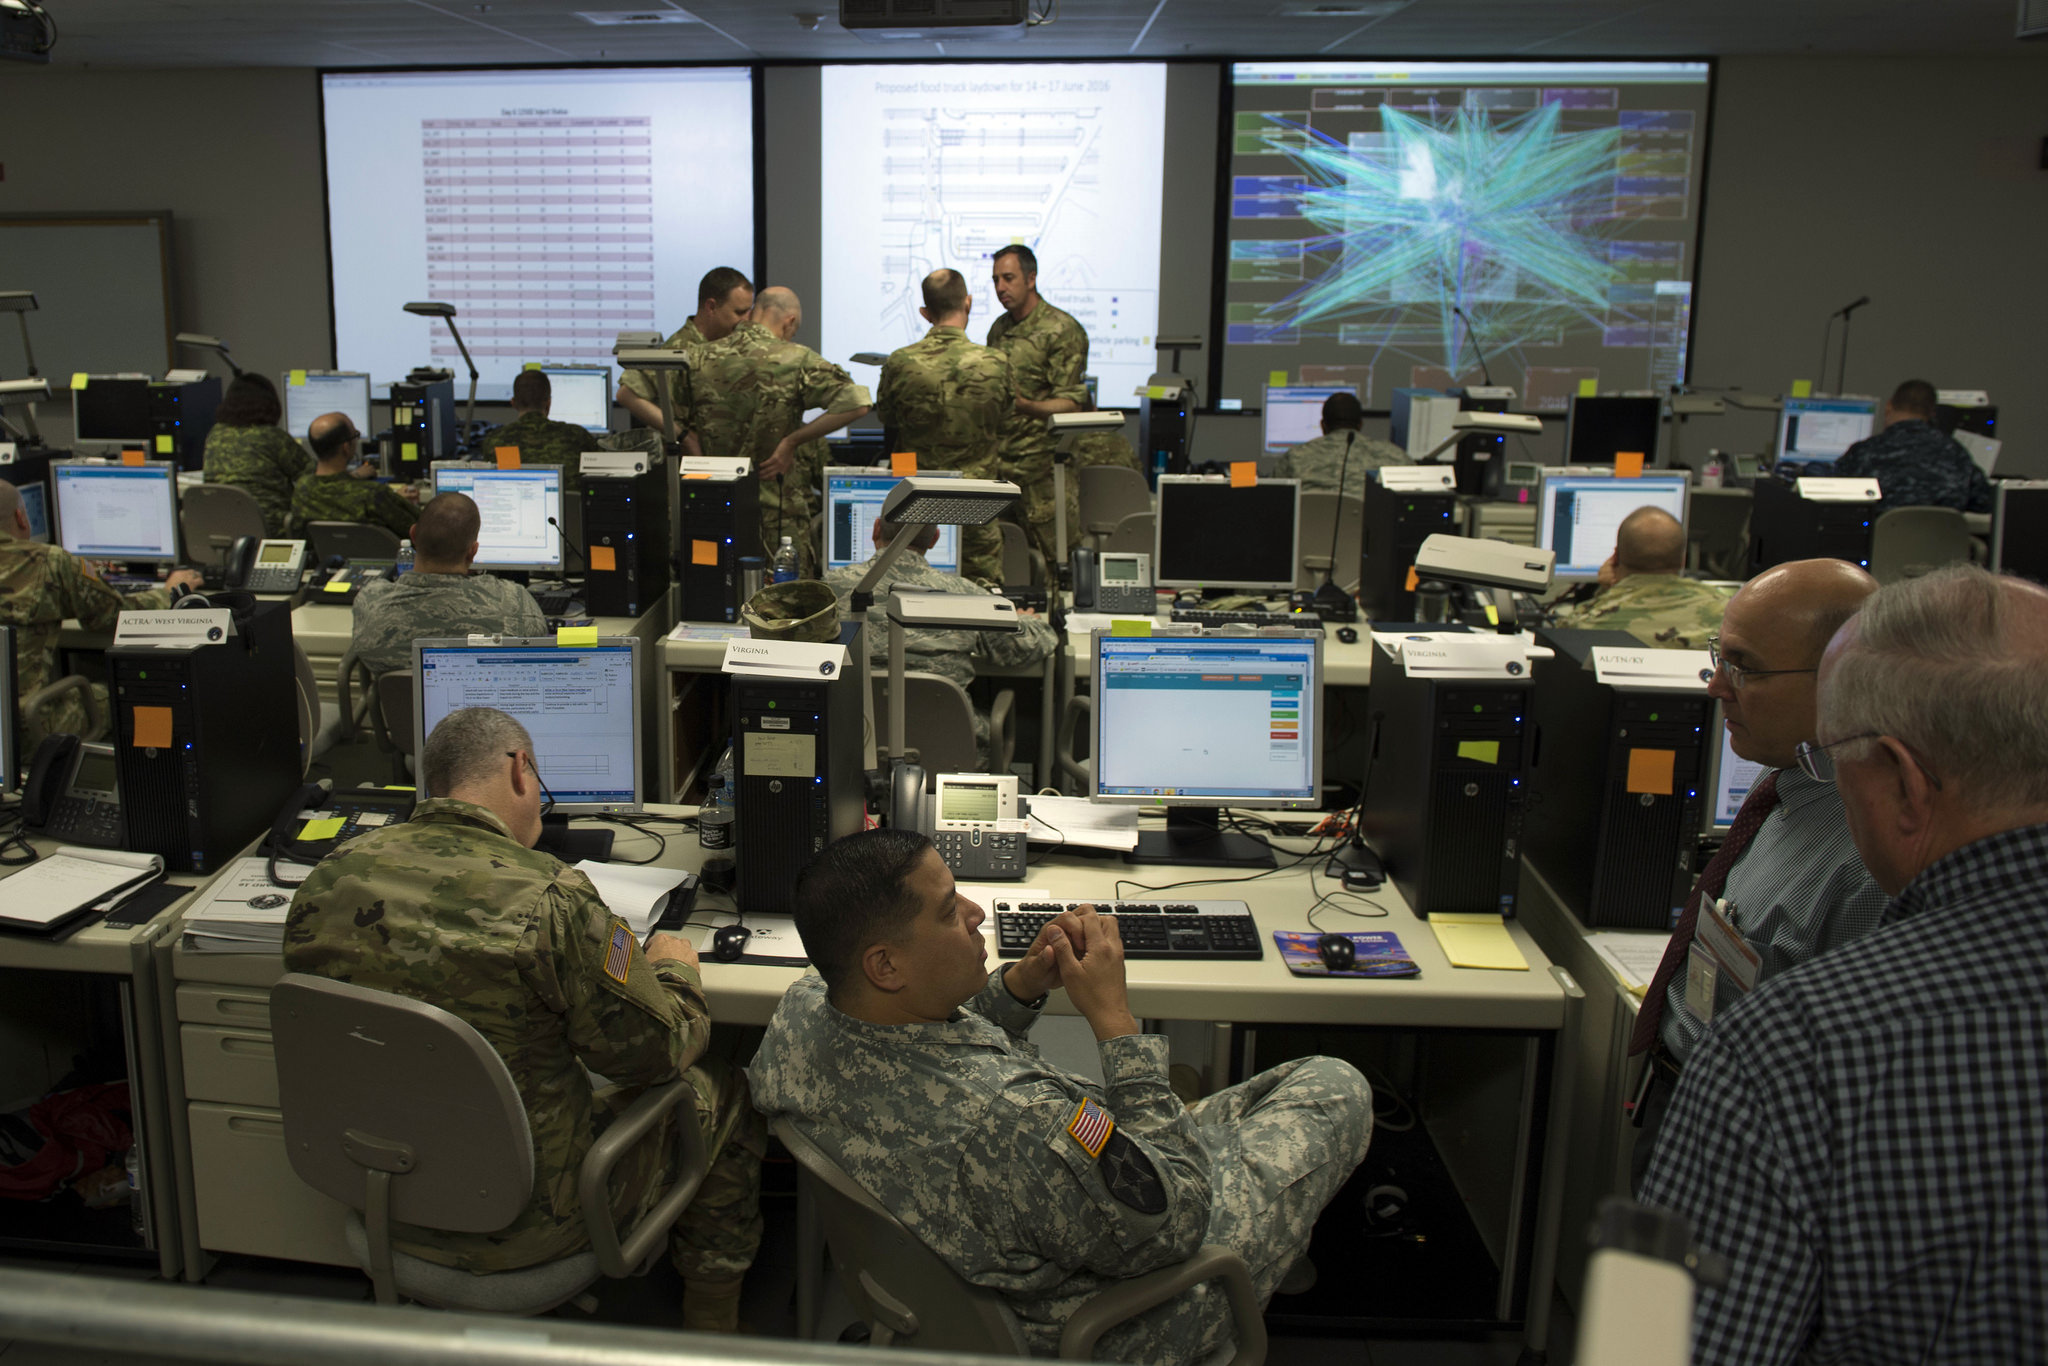 Participants in the joint, multinational exercise Cyber Guard 2016 work through a training scenario during the nine-day event in Suffolk, Va., June 16, 2016. Navy photo by Petty Officer 2nd Class Jesse A. Hyatt. -